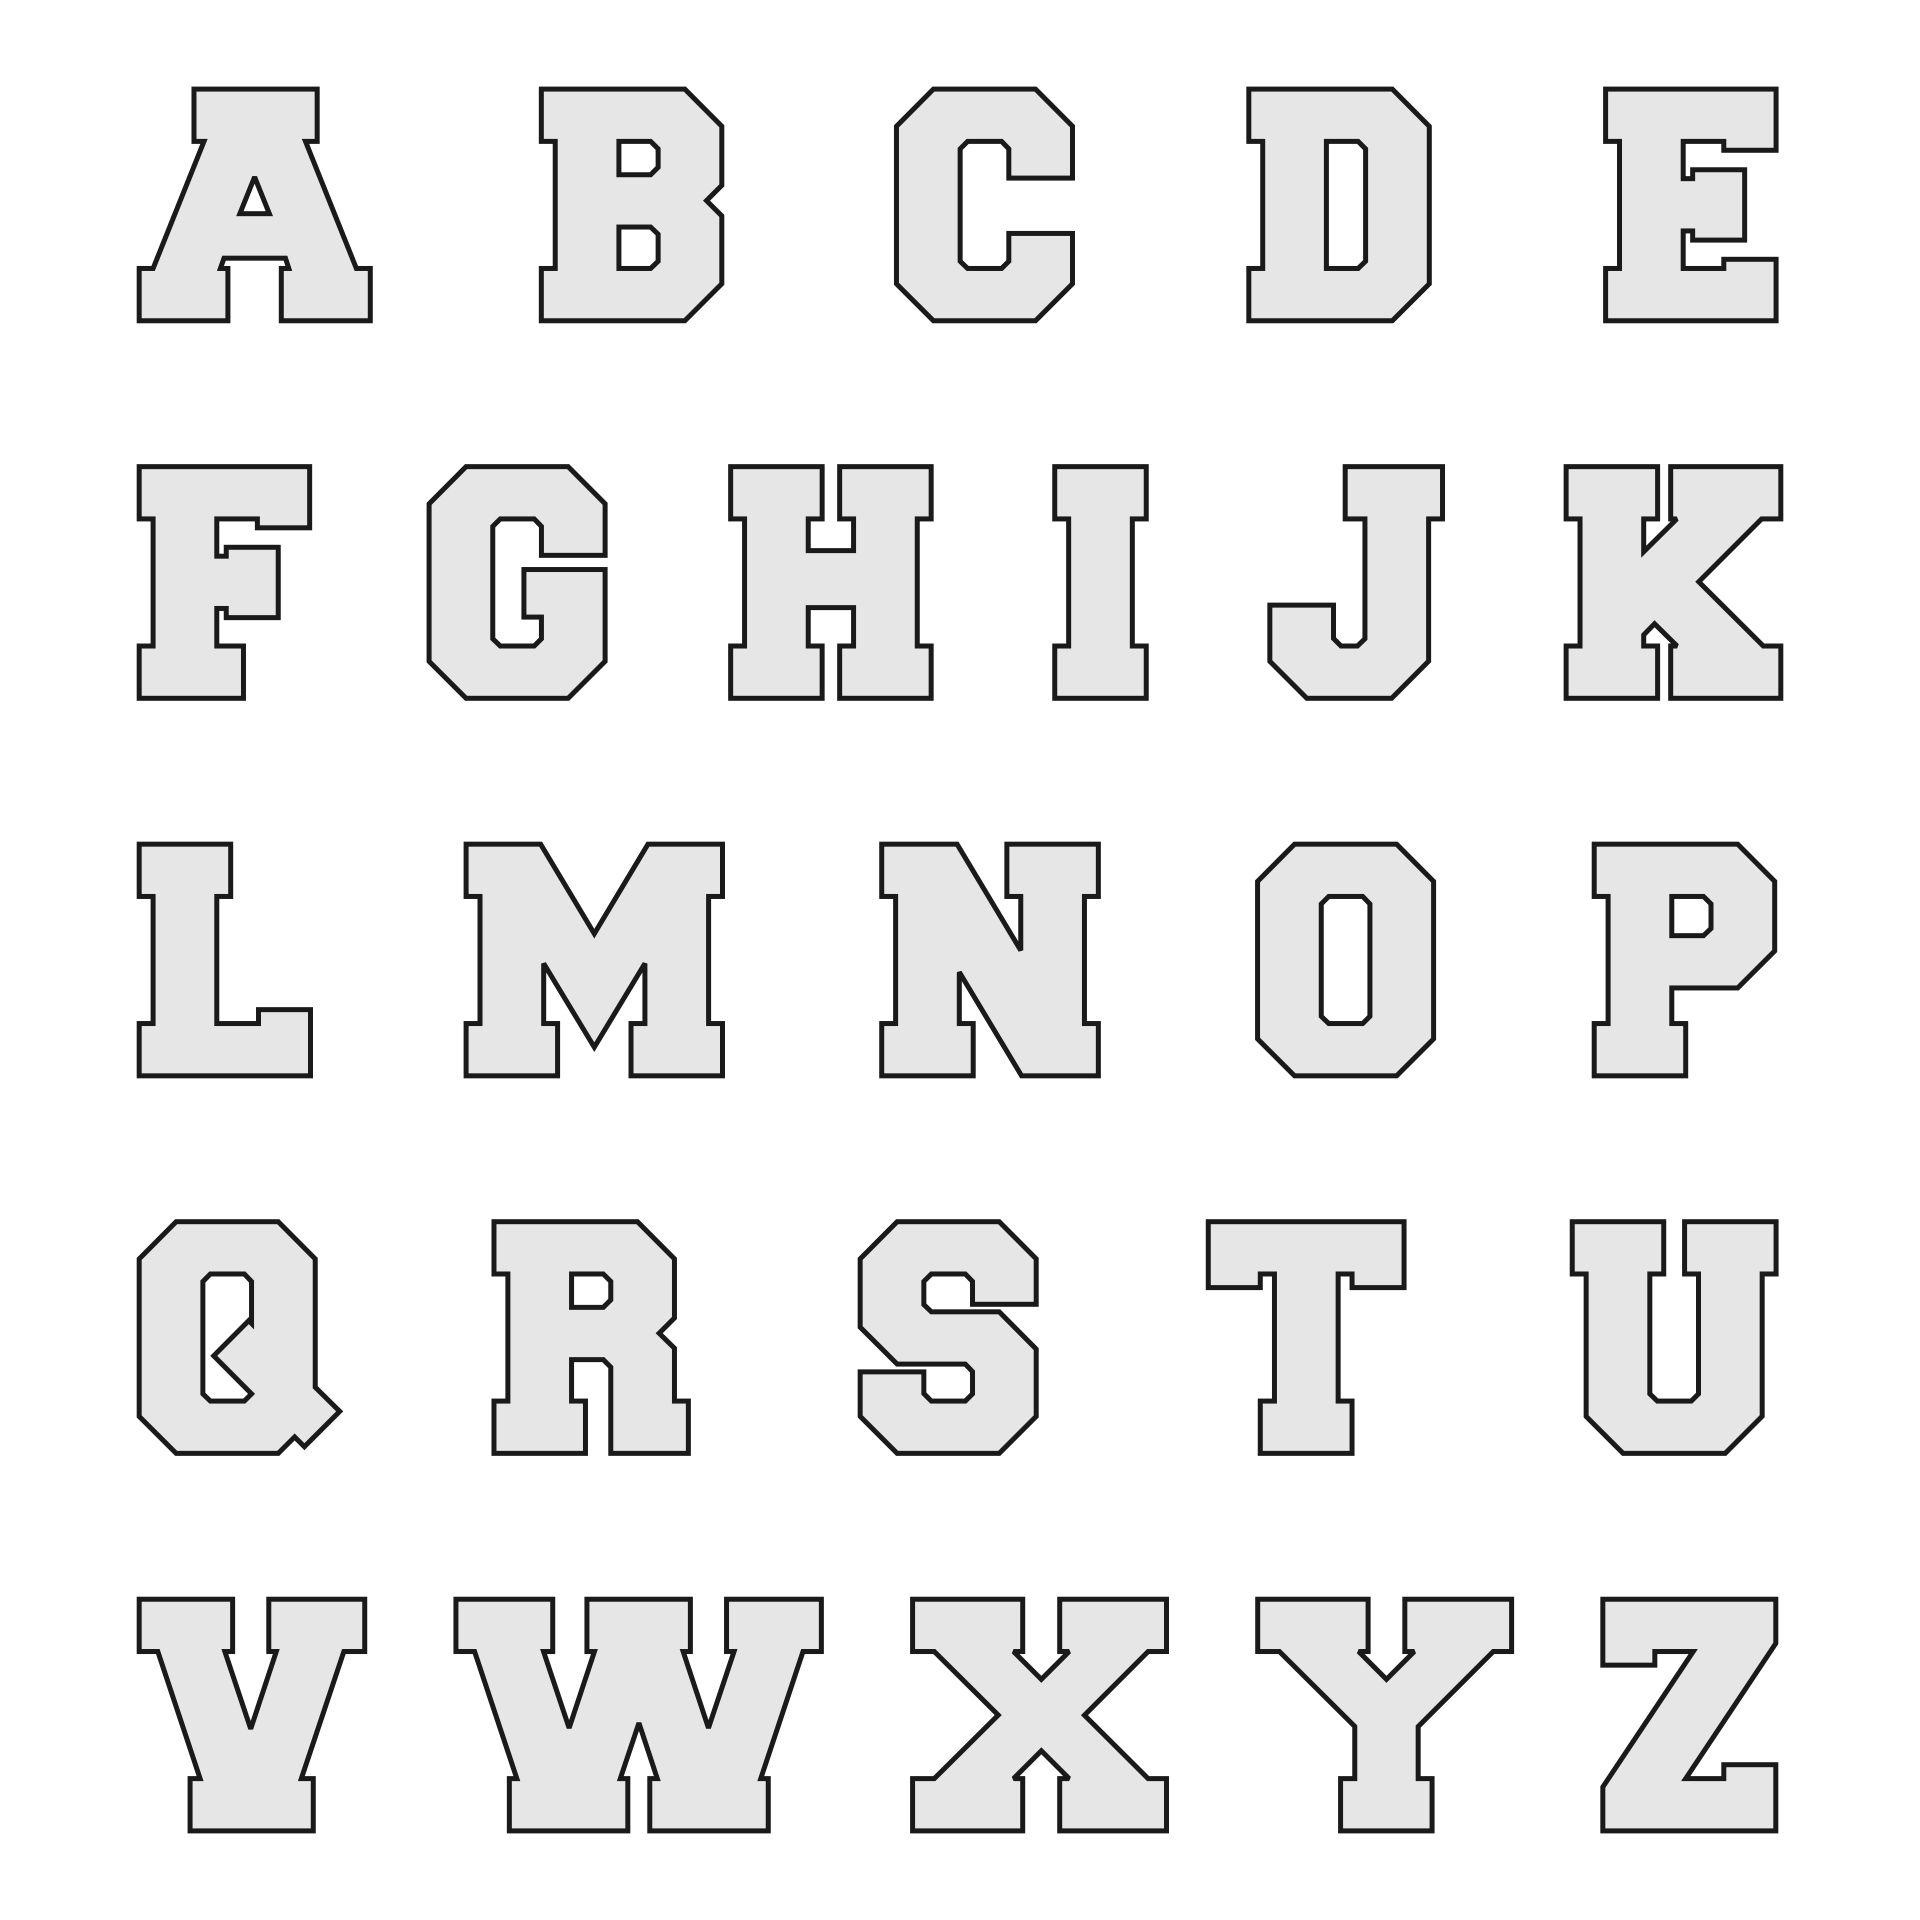 6-best-images-of-printable-block-letters-small-medium-large-size